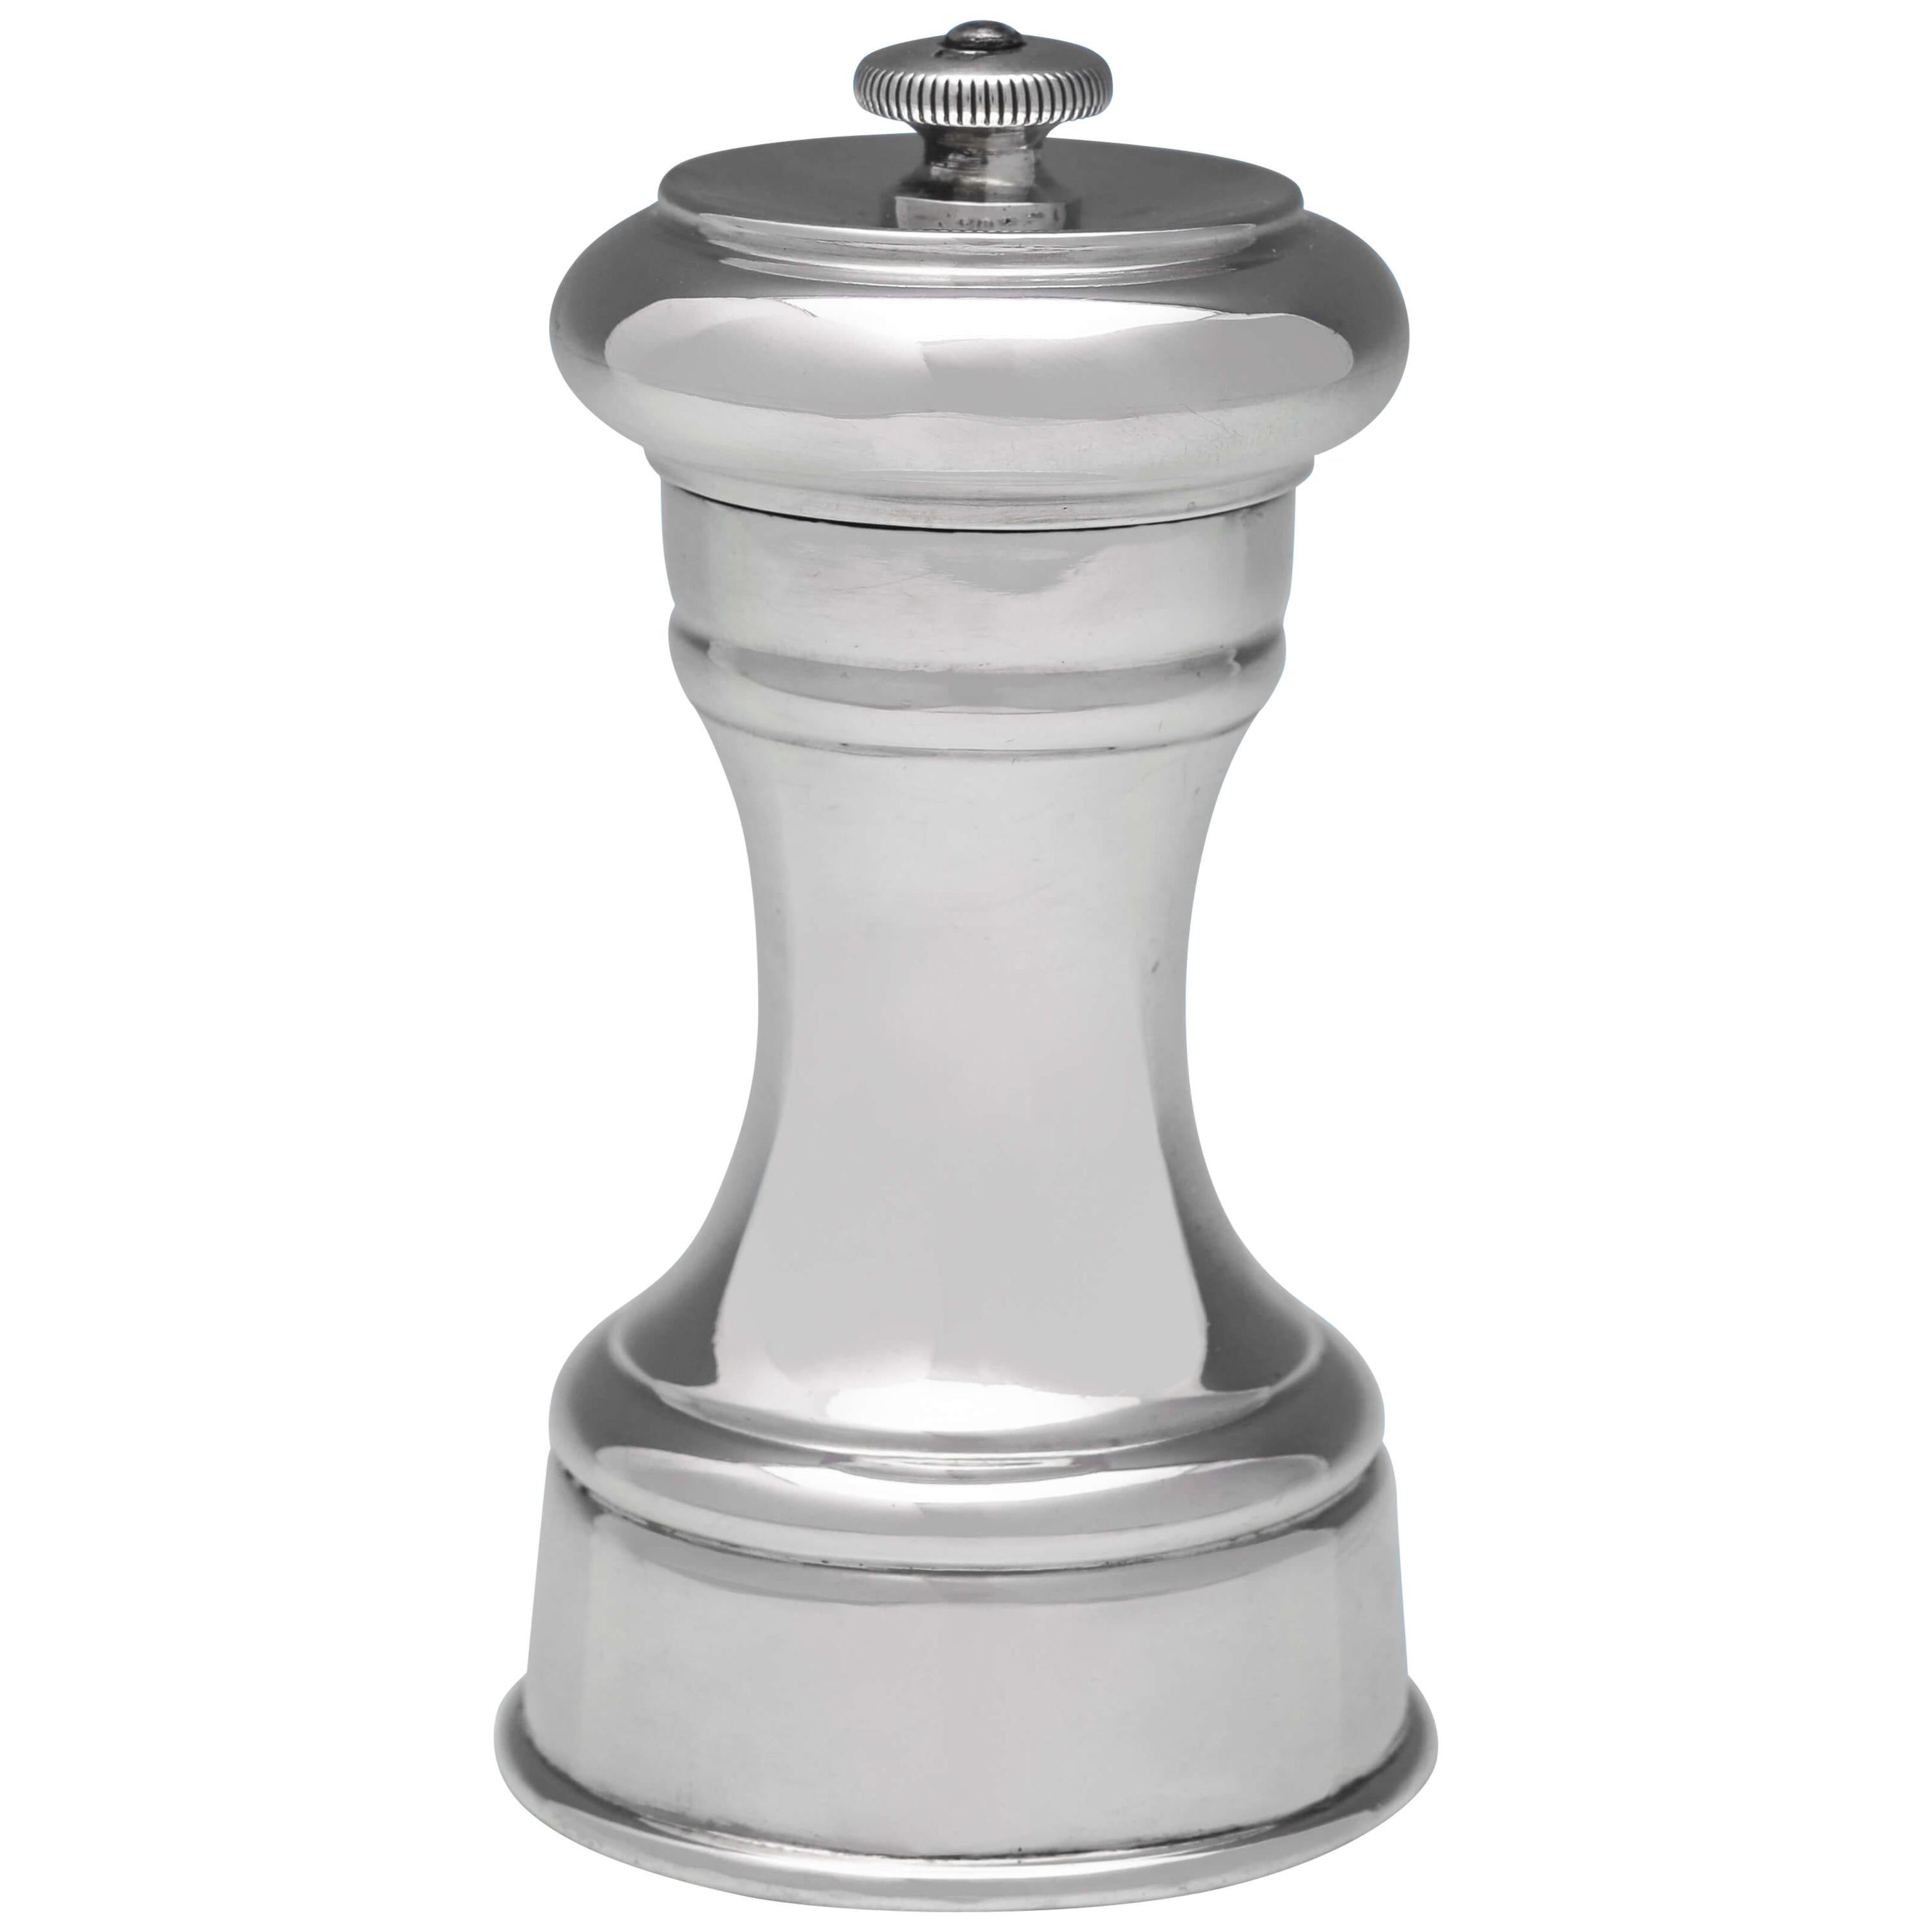 Antique, Sterling Silver 'Capstan' Pepper Grinder with Peugeot Mechanism, 1899